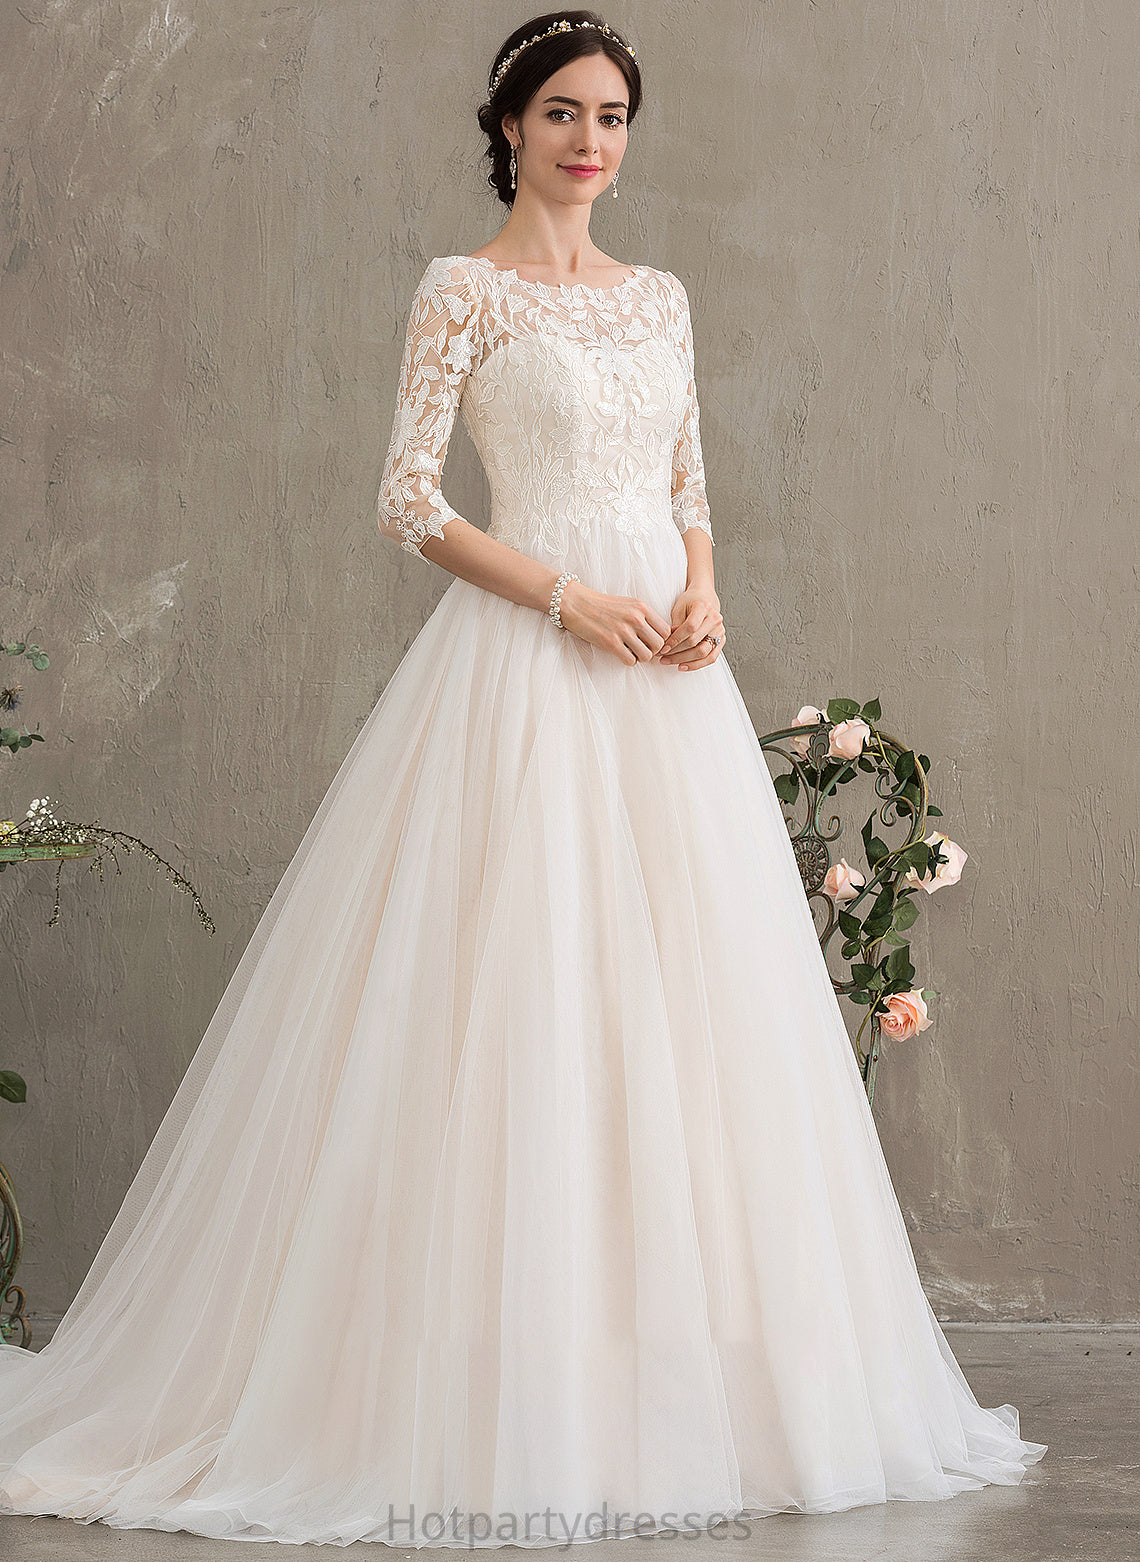 Madelynn Neck With Scoop Wedding Wedding Dresses Court Dress Tulle Train Ball-Gown/Princess Sequins